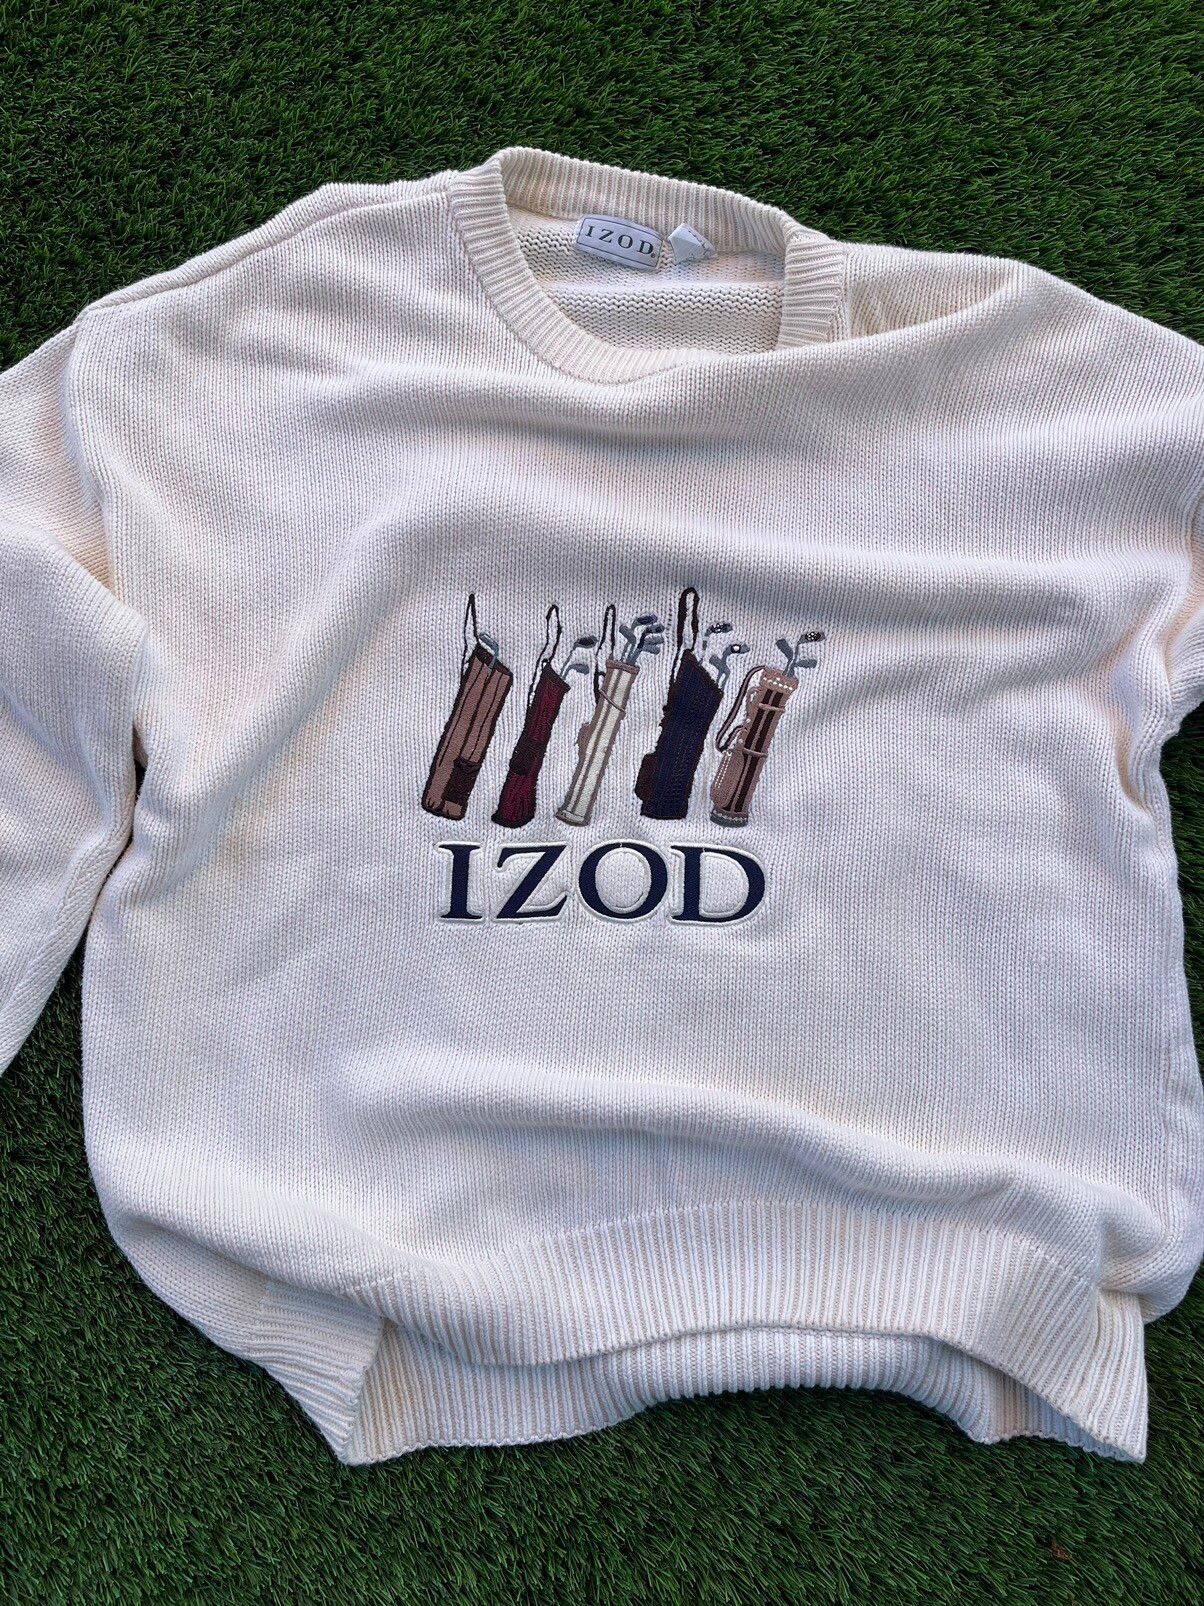 Izod Vintage IZOD Golf Knitted Sweater Size US XL / EU 56 / 4 - 1 Preview